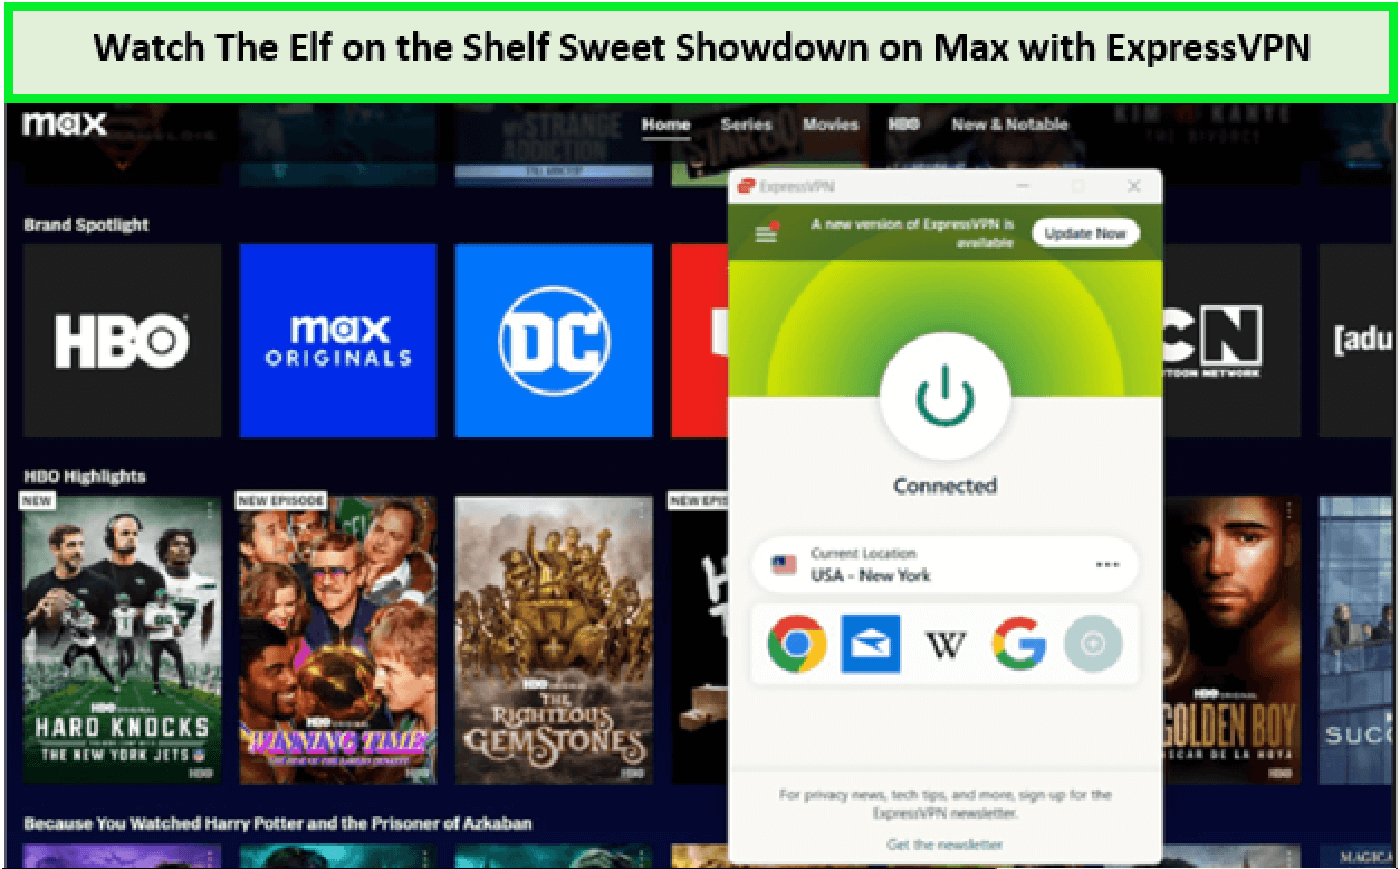 Watch-The-Elf-on-the-Shelf-Sweet-Showdown-in-Germany-on-Max-with-ExpressVPN